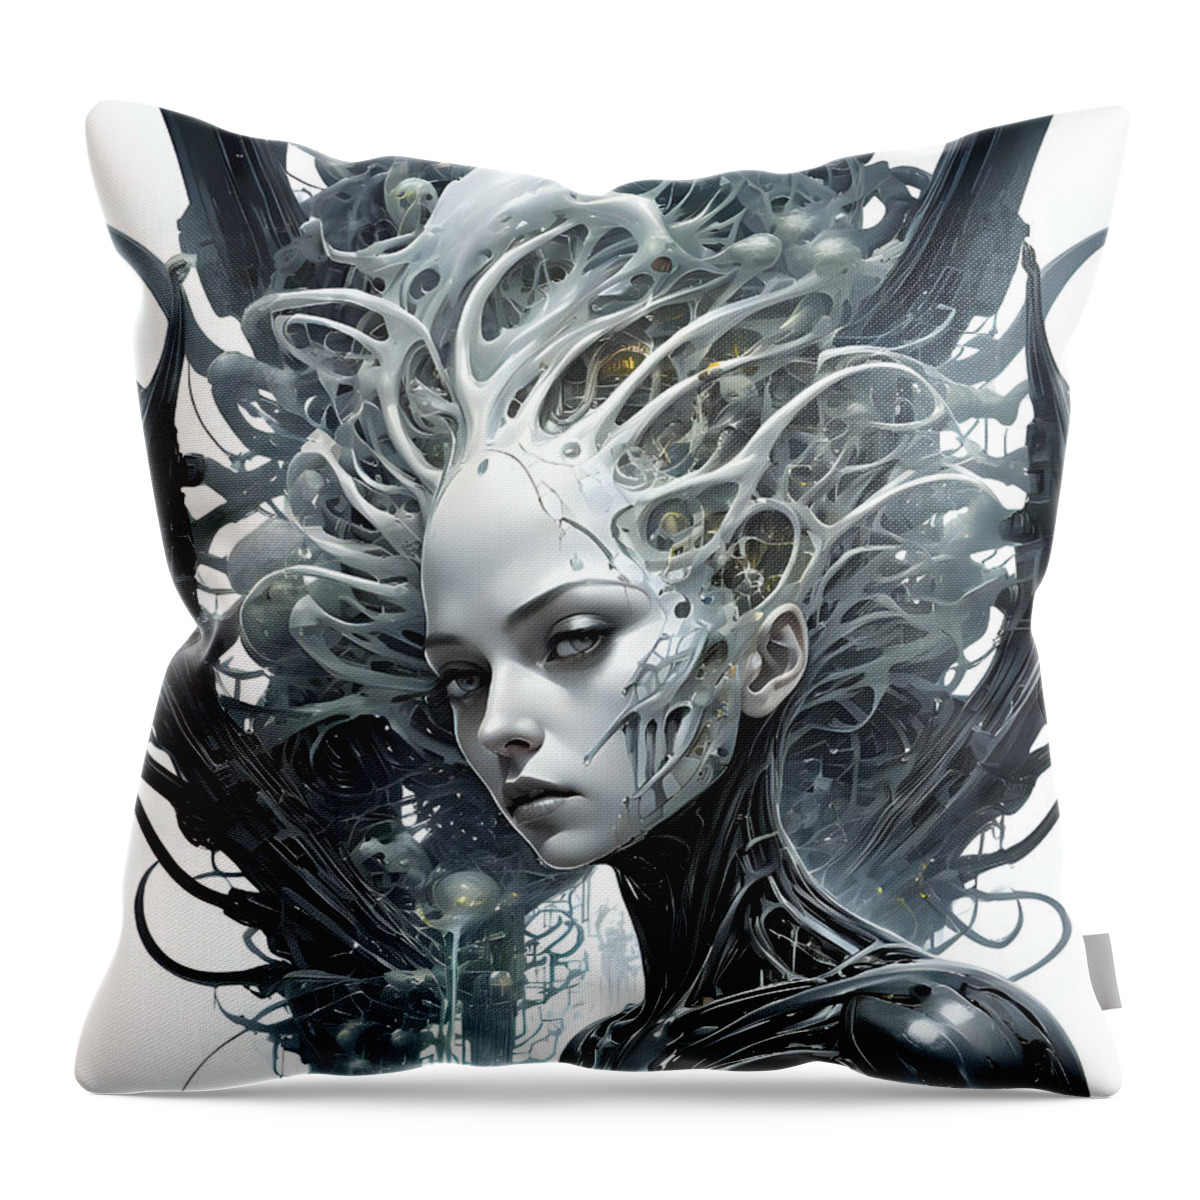 Sci-fi Throw Pillow featuring the digital art Algorithm Input by Tricky Woo